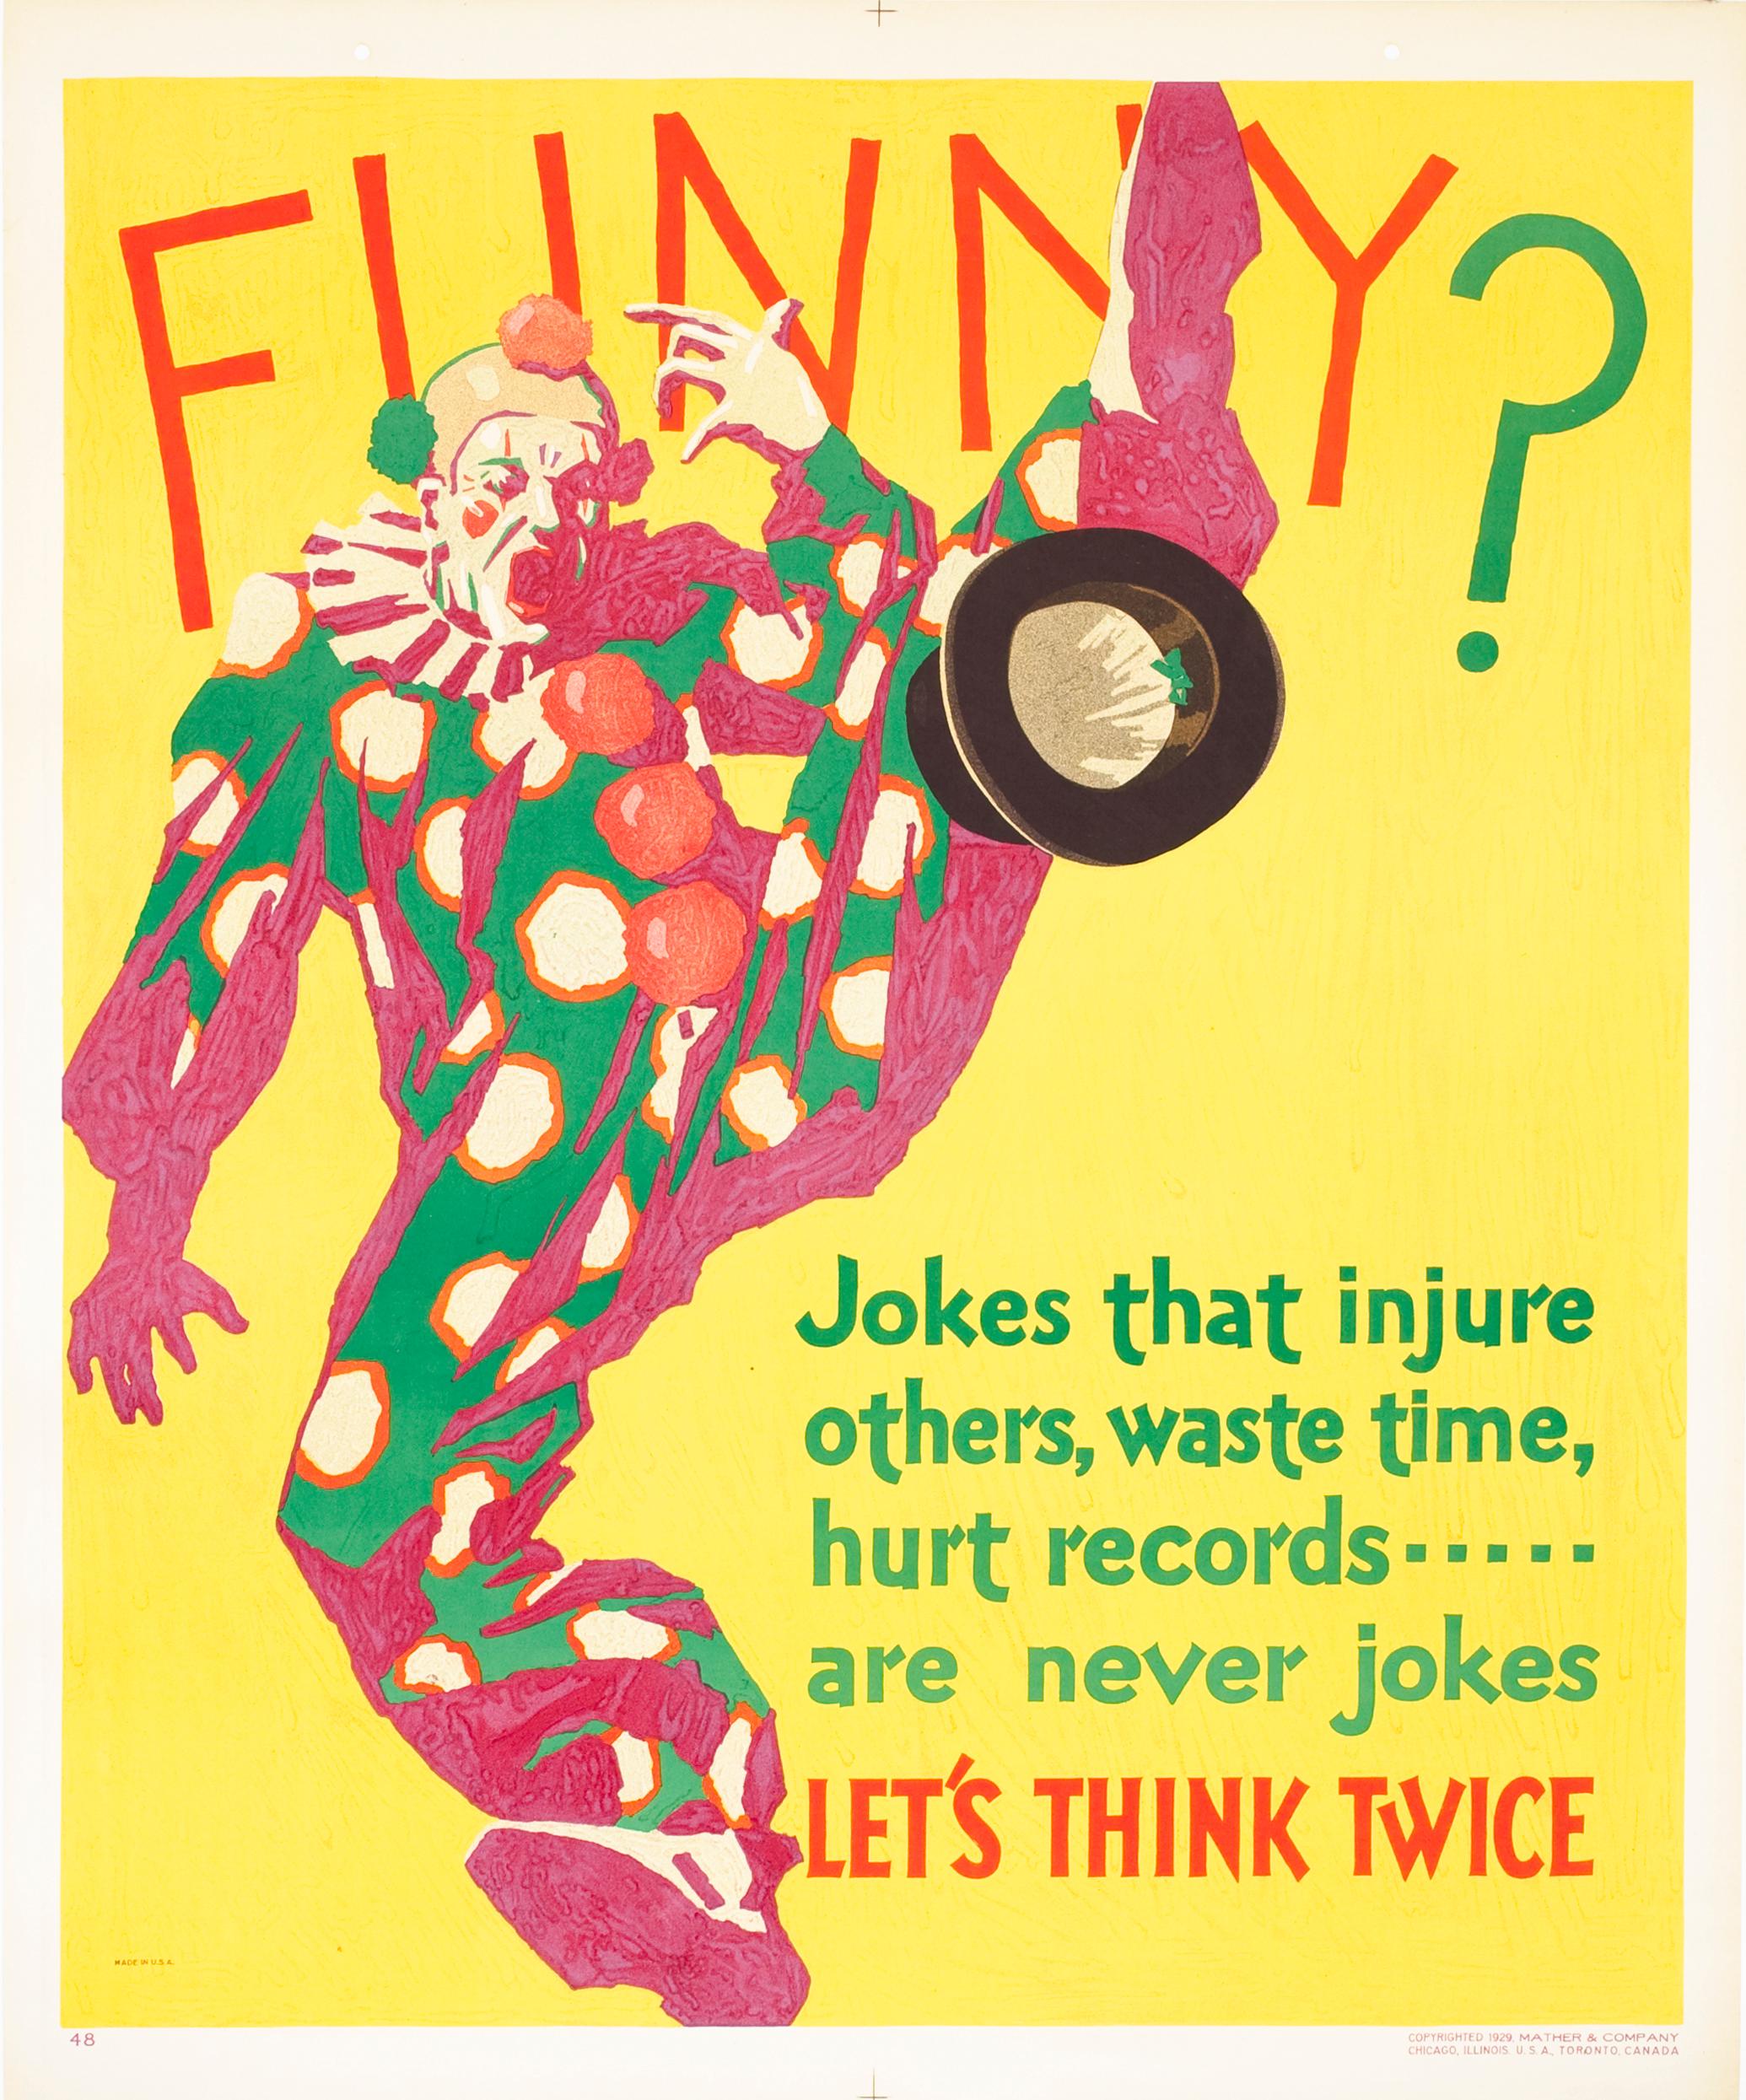 "Funny? (Mather Work Incentive)" Original Vintage Work Incentive Poster - Print by Unknown